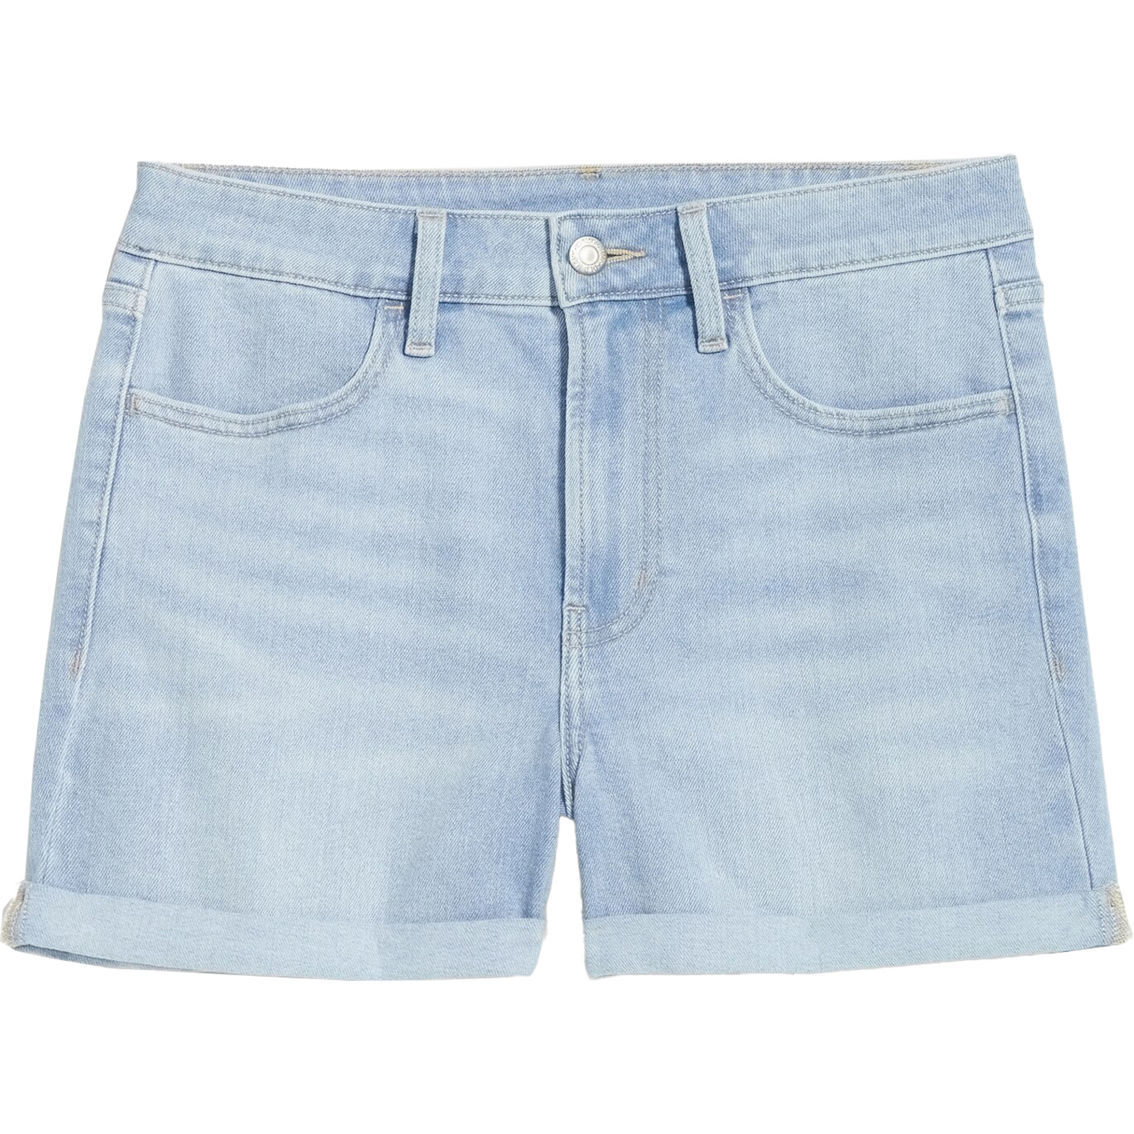 Old Navy High-Waisted Wow 3 in. Jean Shorts - Image 4 of 4